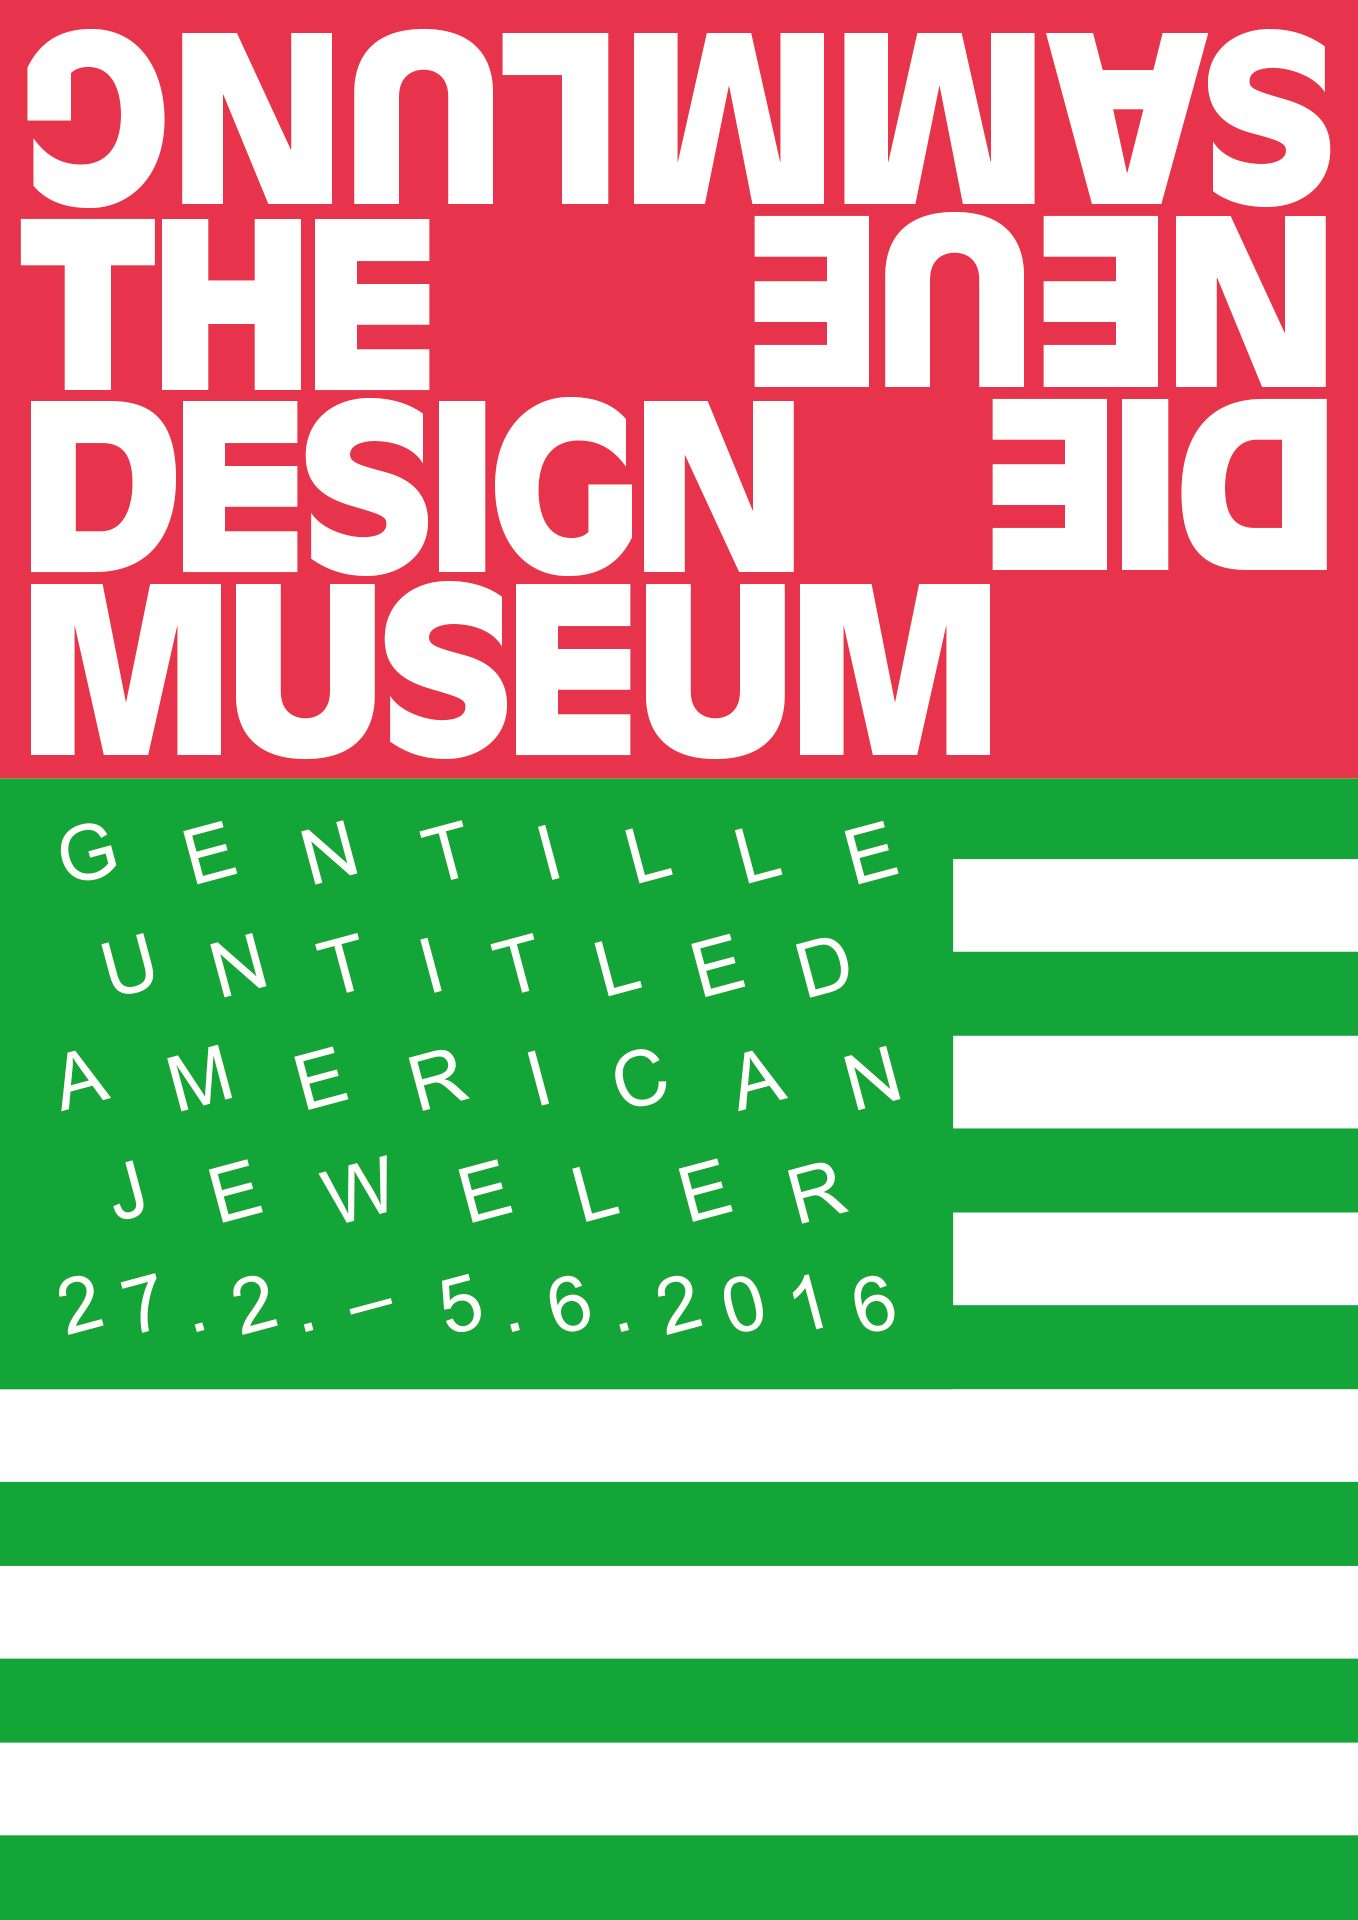 Exhibition poster. The red logo of Die Neue Sammlung in the upper third. Below it, in green on a white background, the stylized US flag, instead of the stars the lettering Gentille Untitled American Jeweler in capital letters with the duration of the exhibition.